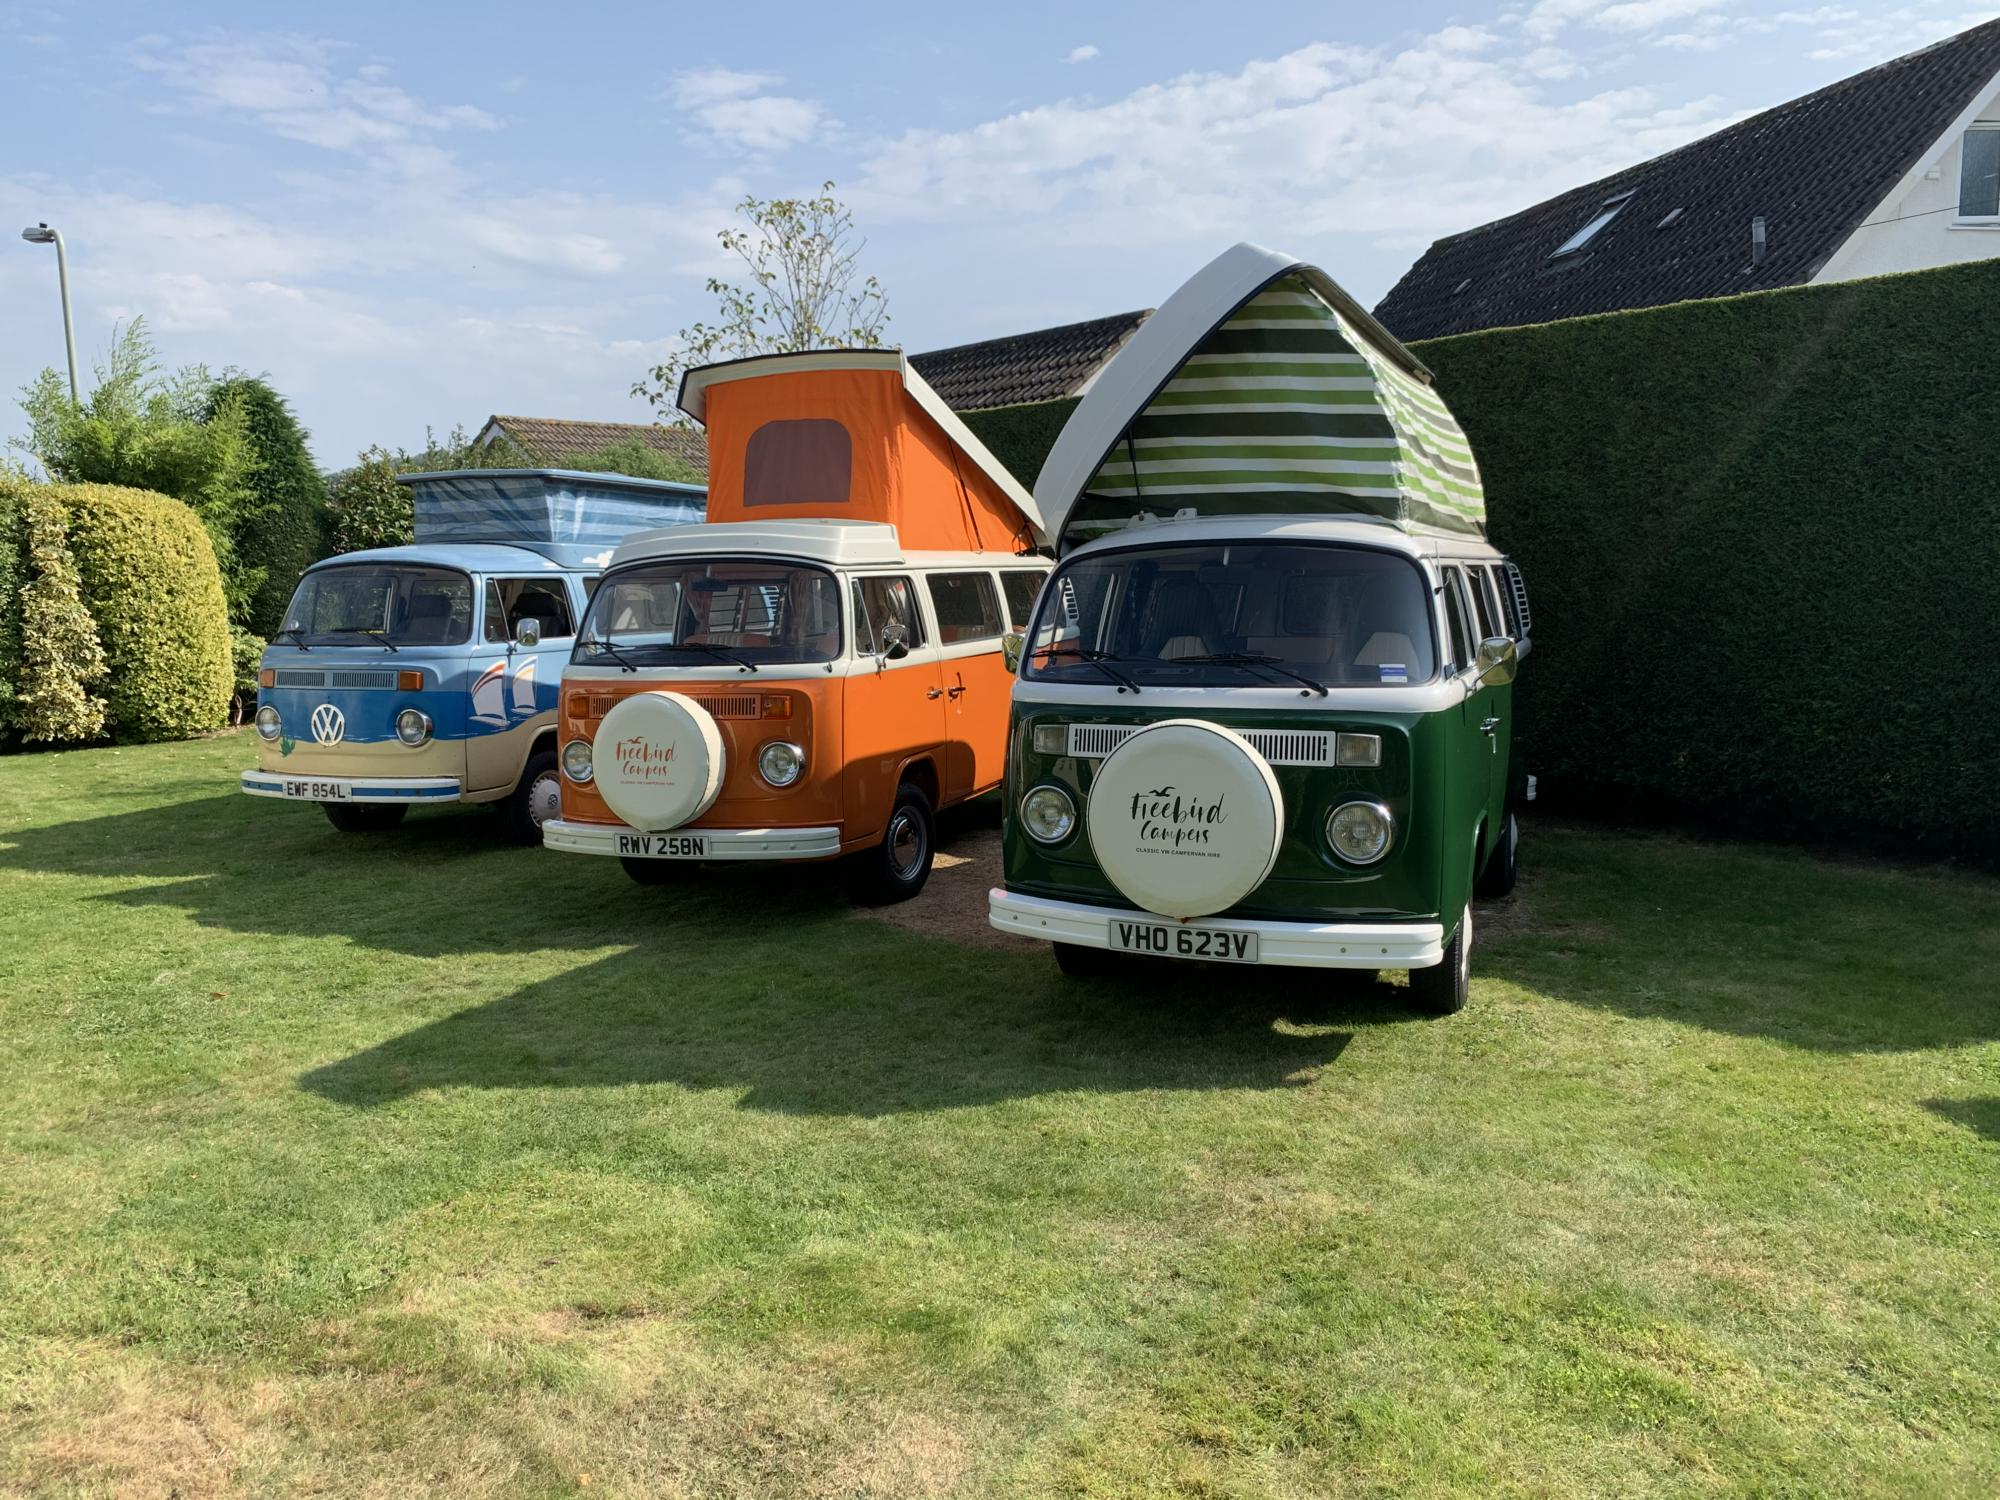 Campervan Hire and Motorhome Rental in Sidmouth & Seaton – Hipcamp Campervans